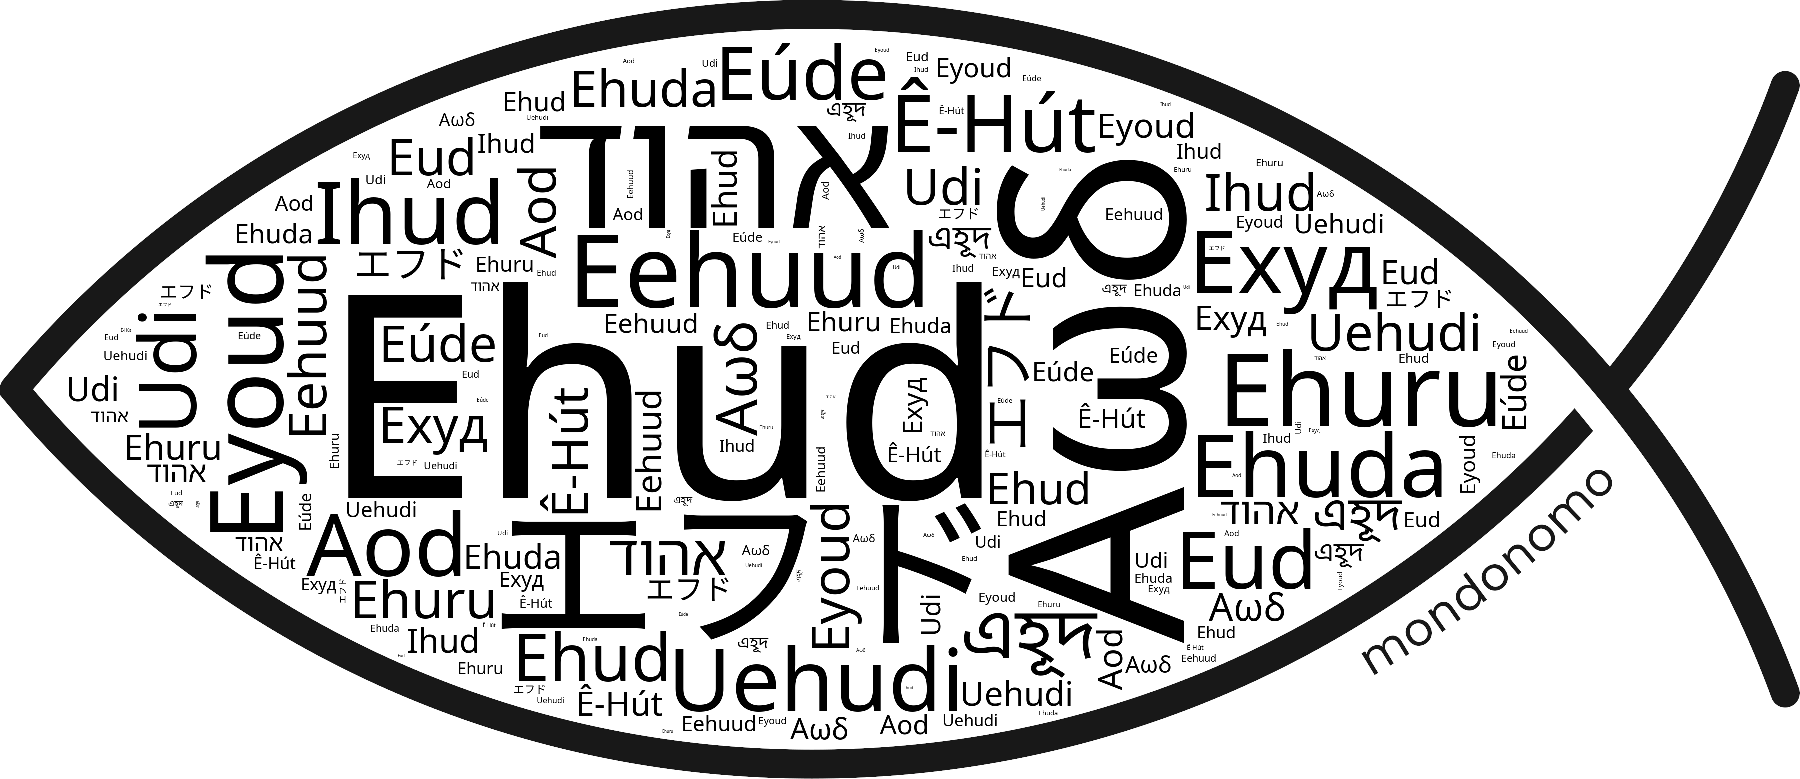 Name Ehud in the world's Bibles